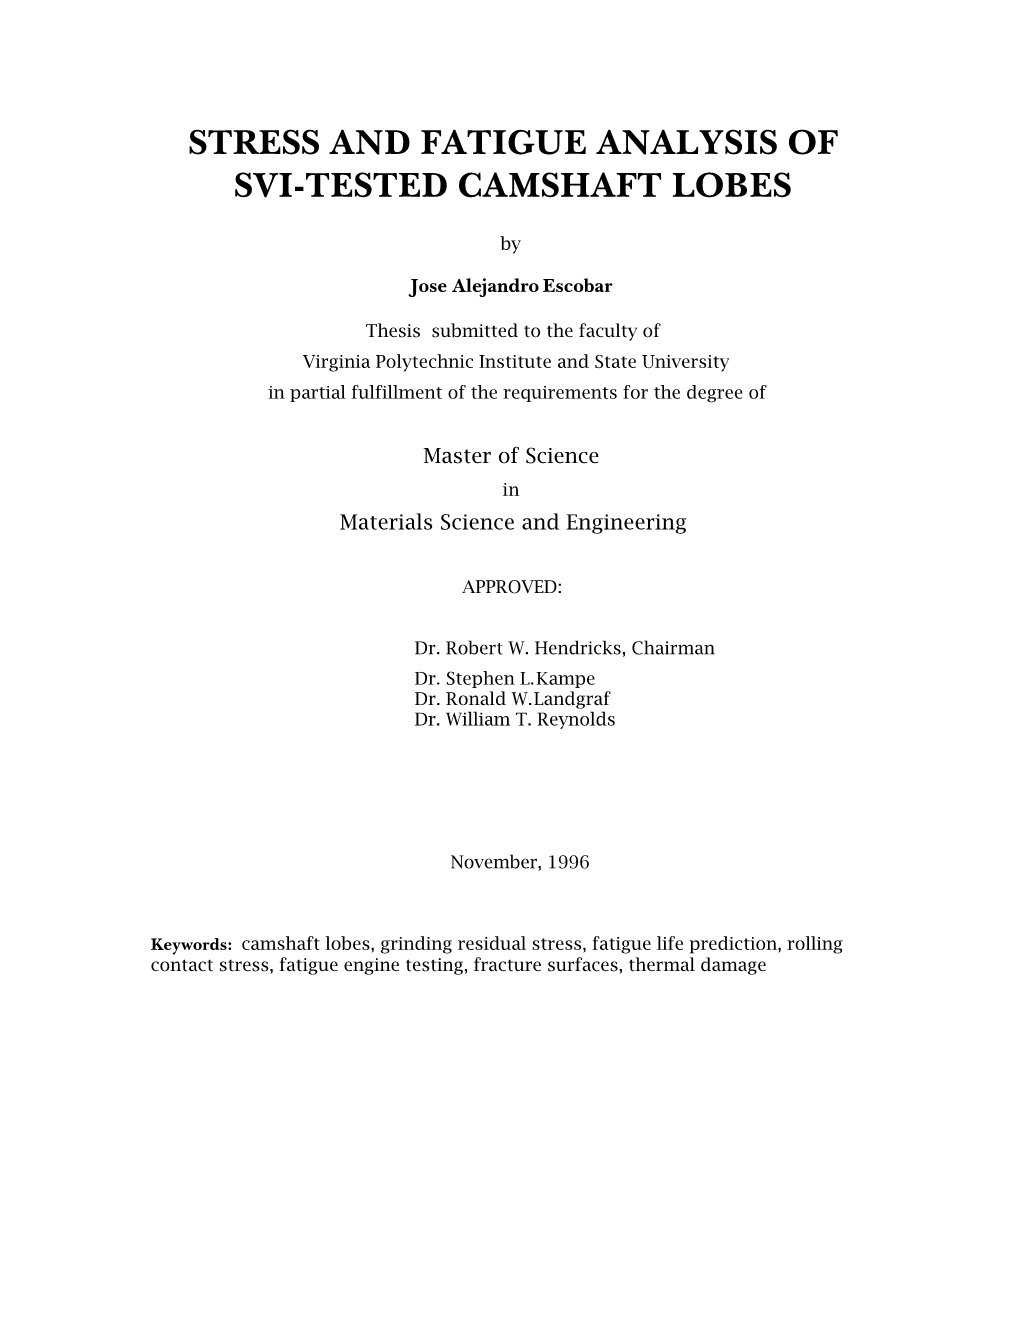 Stress and Fatigue Analysis of Svi-Tested Camshaft Lobes